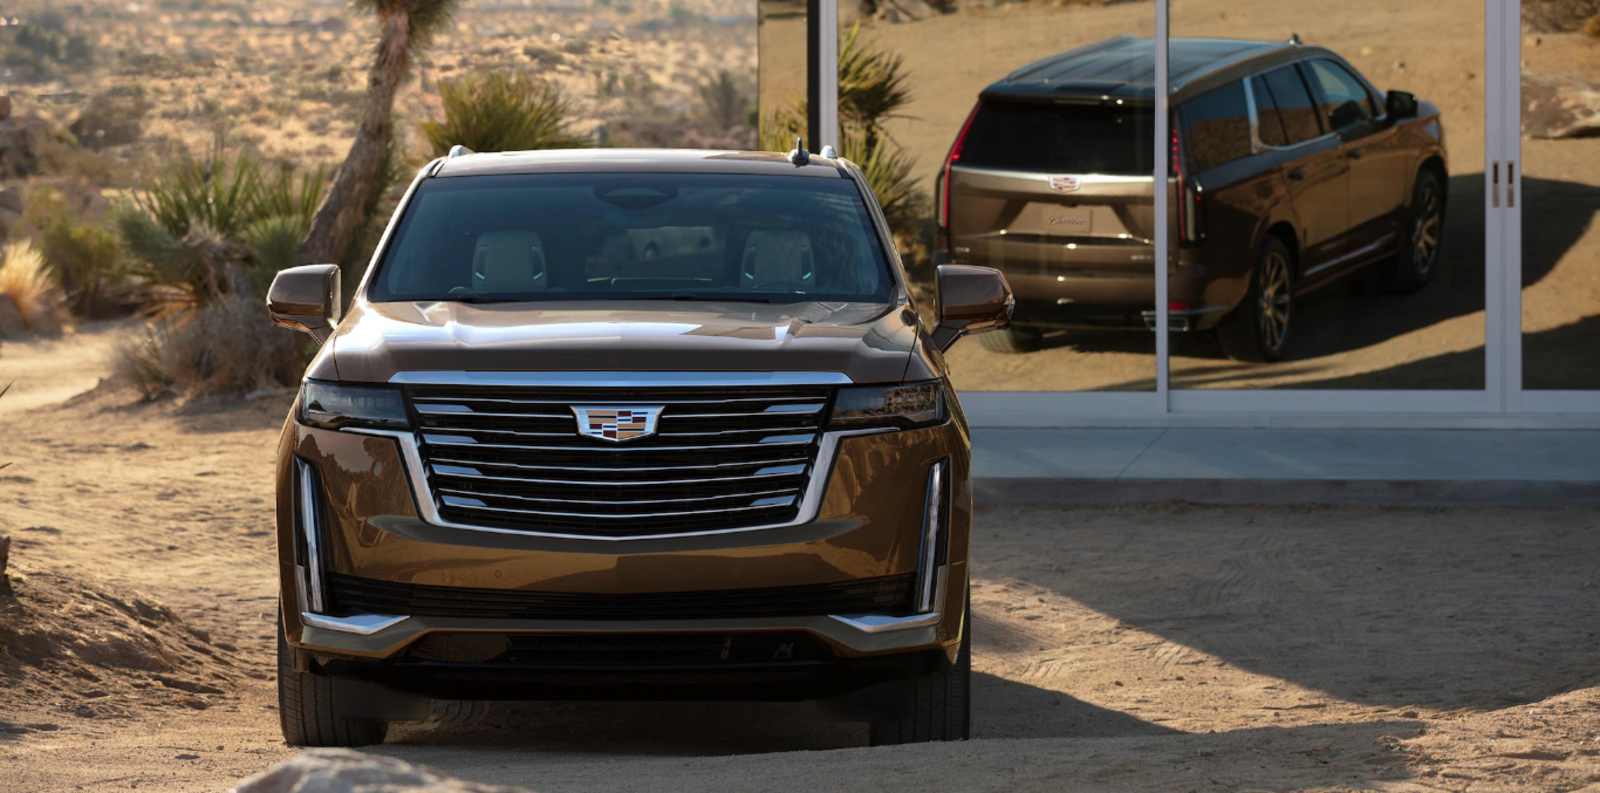 Illustration for article titled The 2021 Cadillac Escalade starts at $77,490;$80,490 for ESV